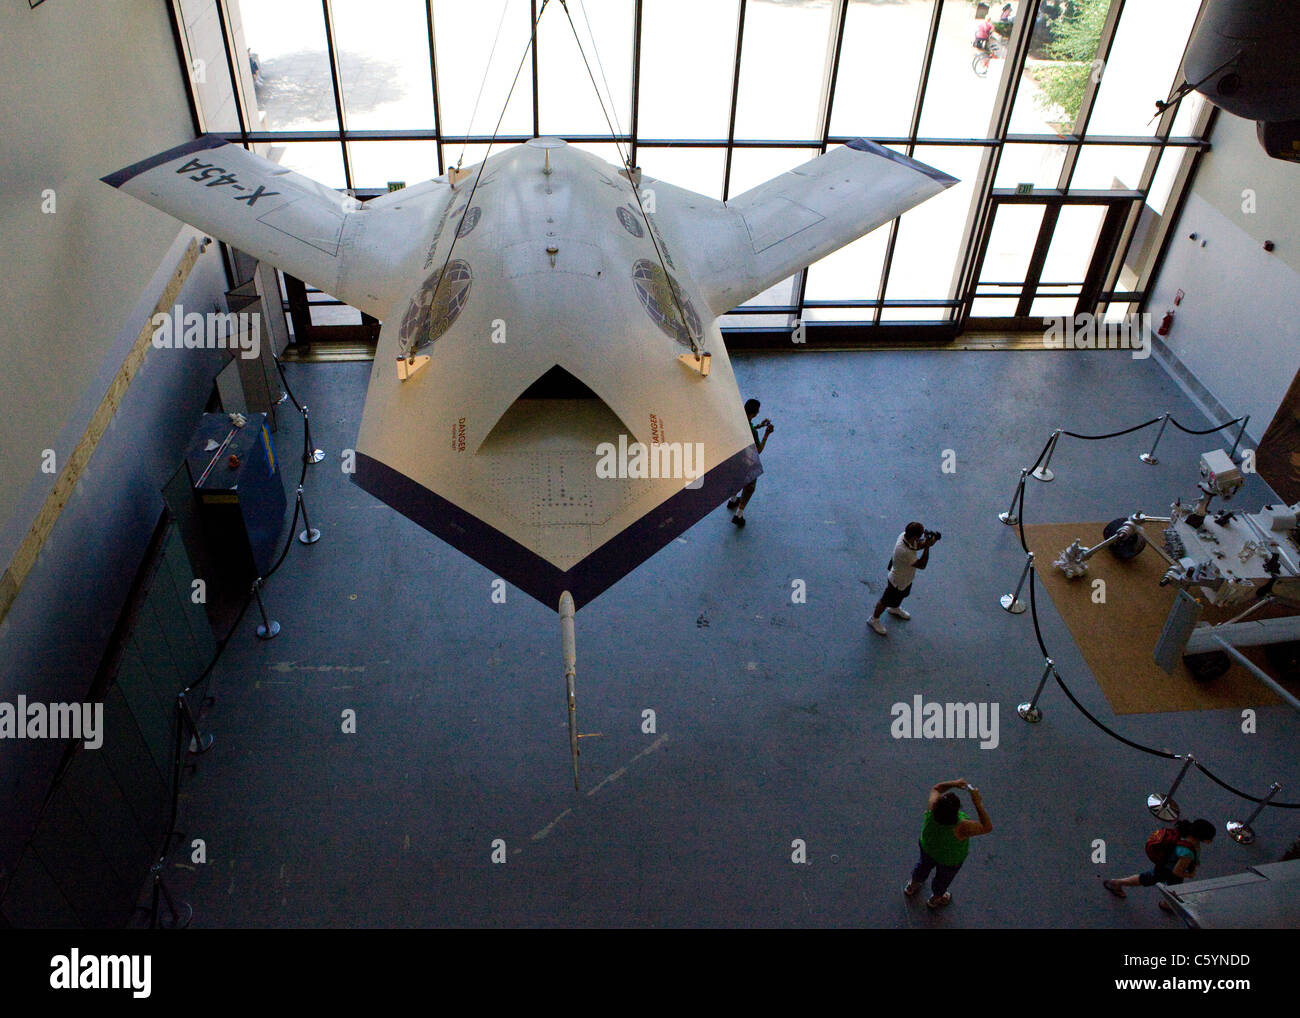 Boeing X-45A unmanned combat Air Vehicle angezeigt in das National Air and Space Museum - Washington, DC USA Stockfoto